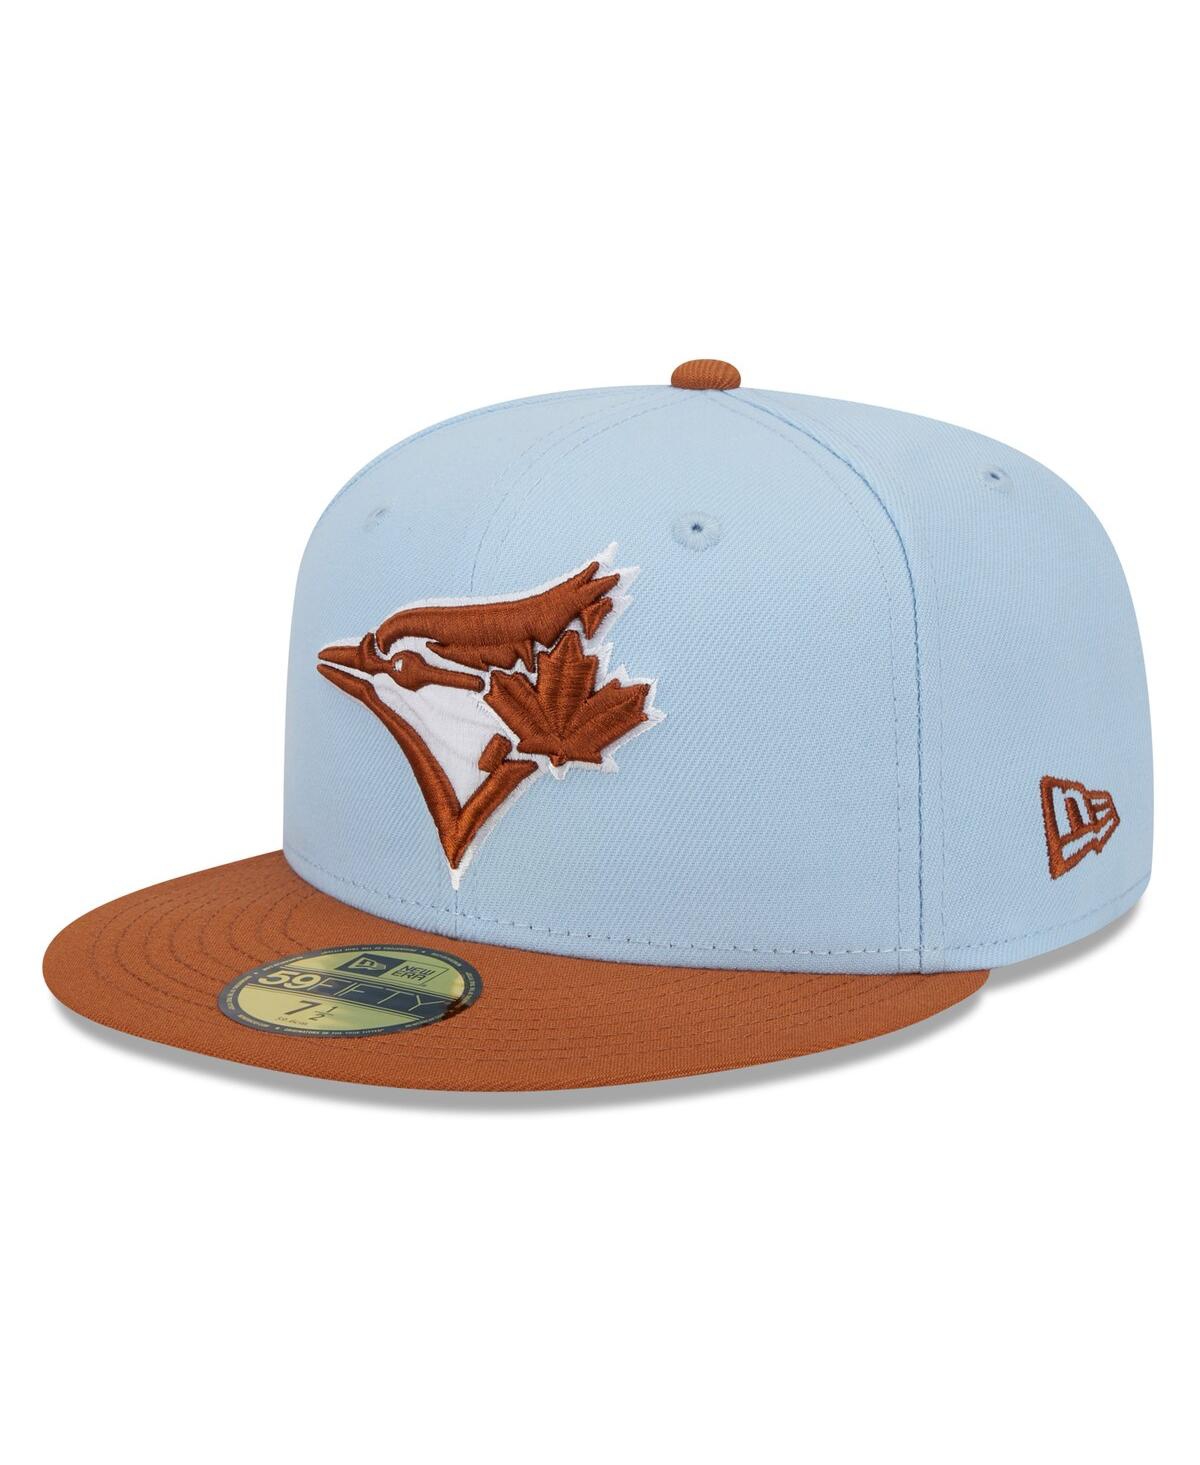 Men's Light Blue/Brown Toronto Blue Jays Spring Color Basic Two-Tone 59Fifty Fitted Hat - Light Blue